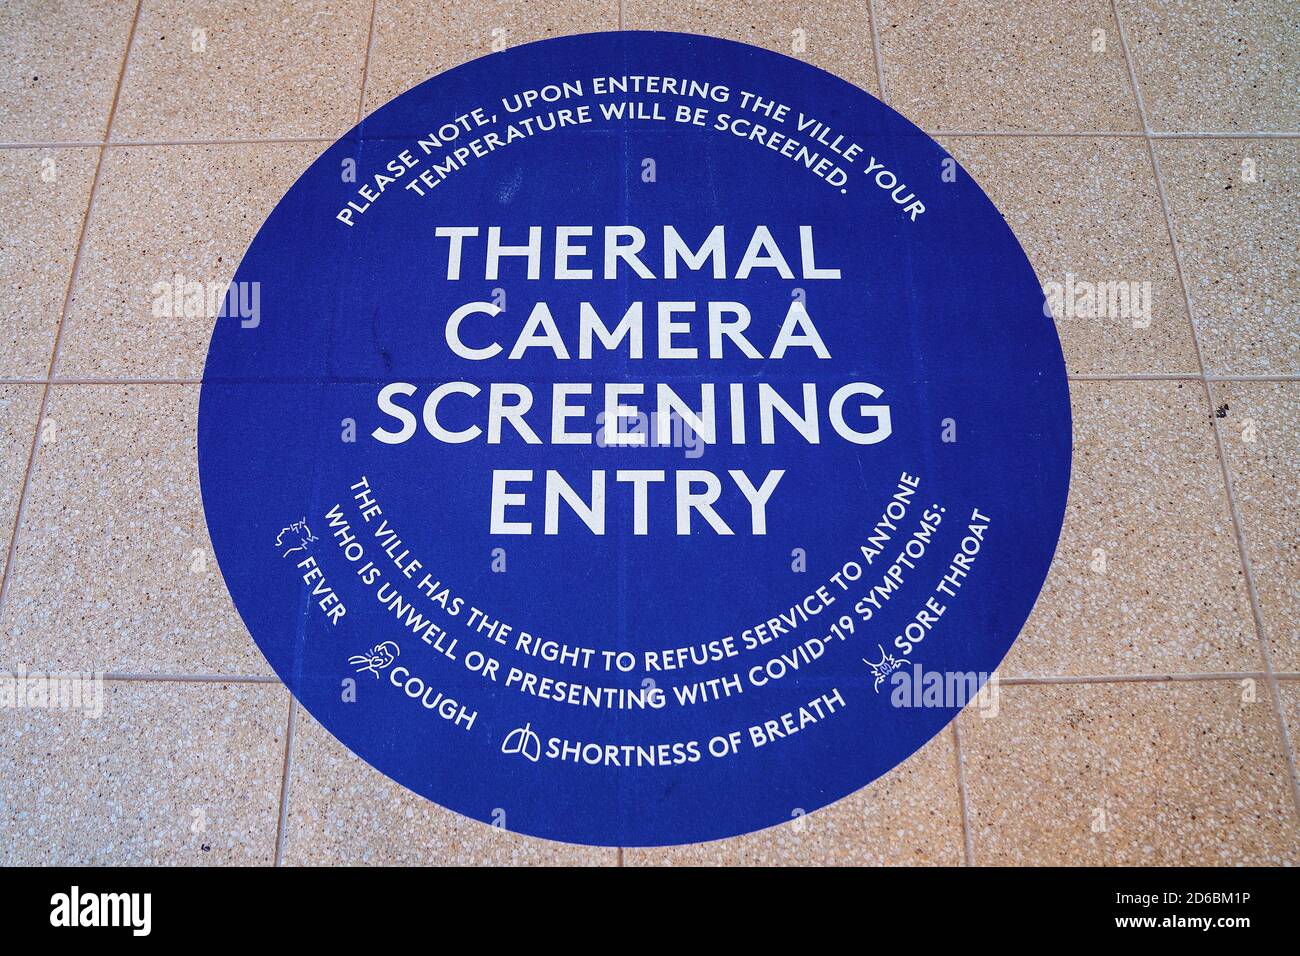 Townsville, Queensland, Australia - June 2020: Thermal Camera Screening Entry sign in foyer of hotel and casino Stock Photo